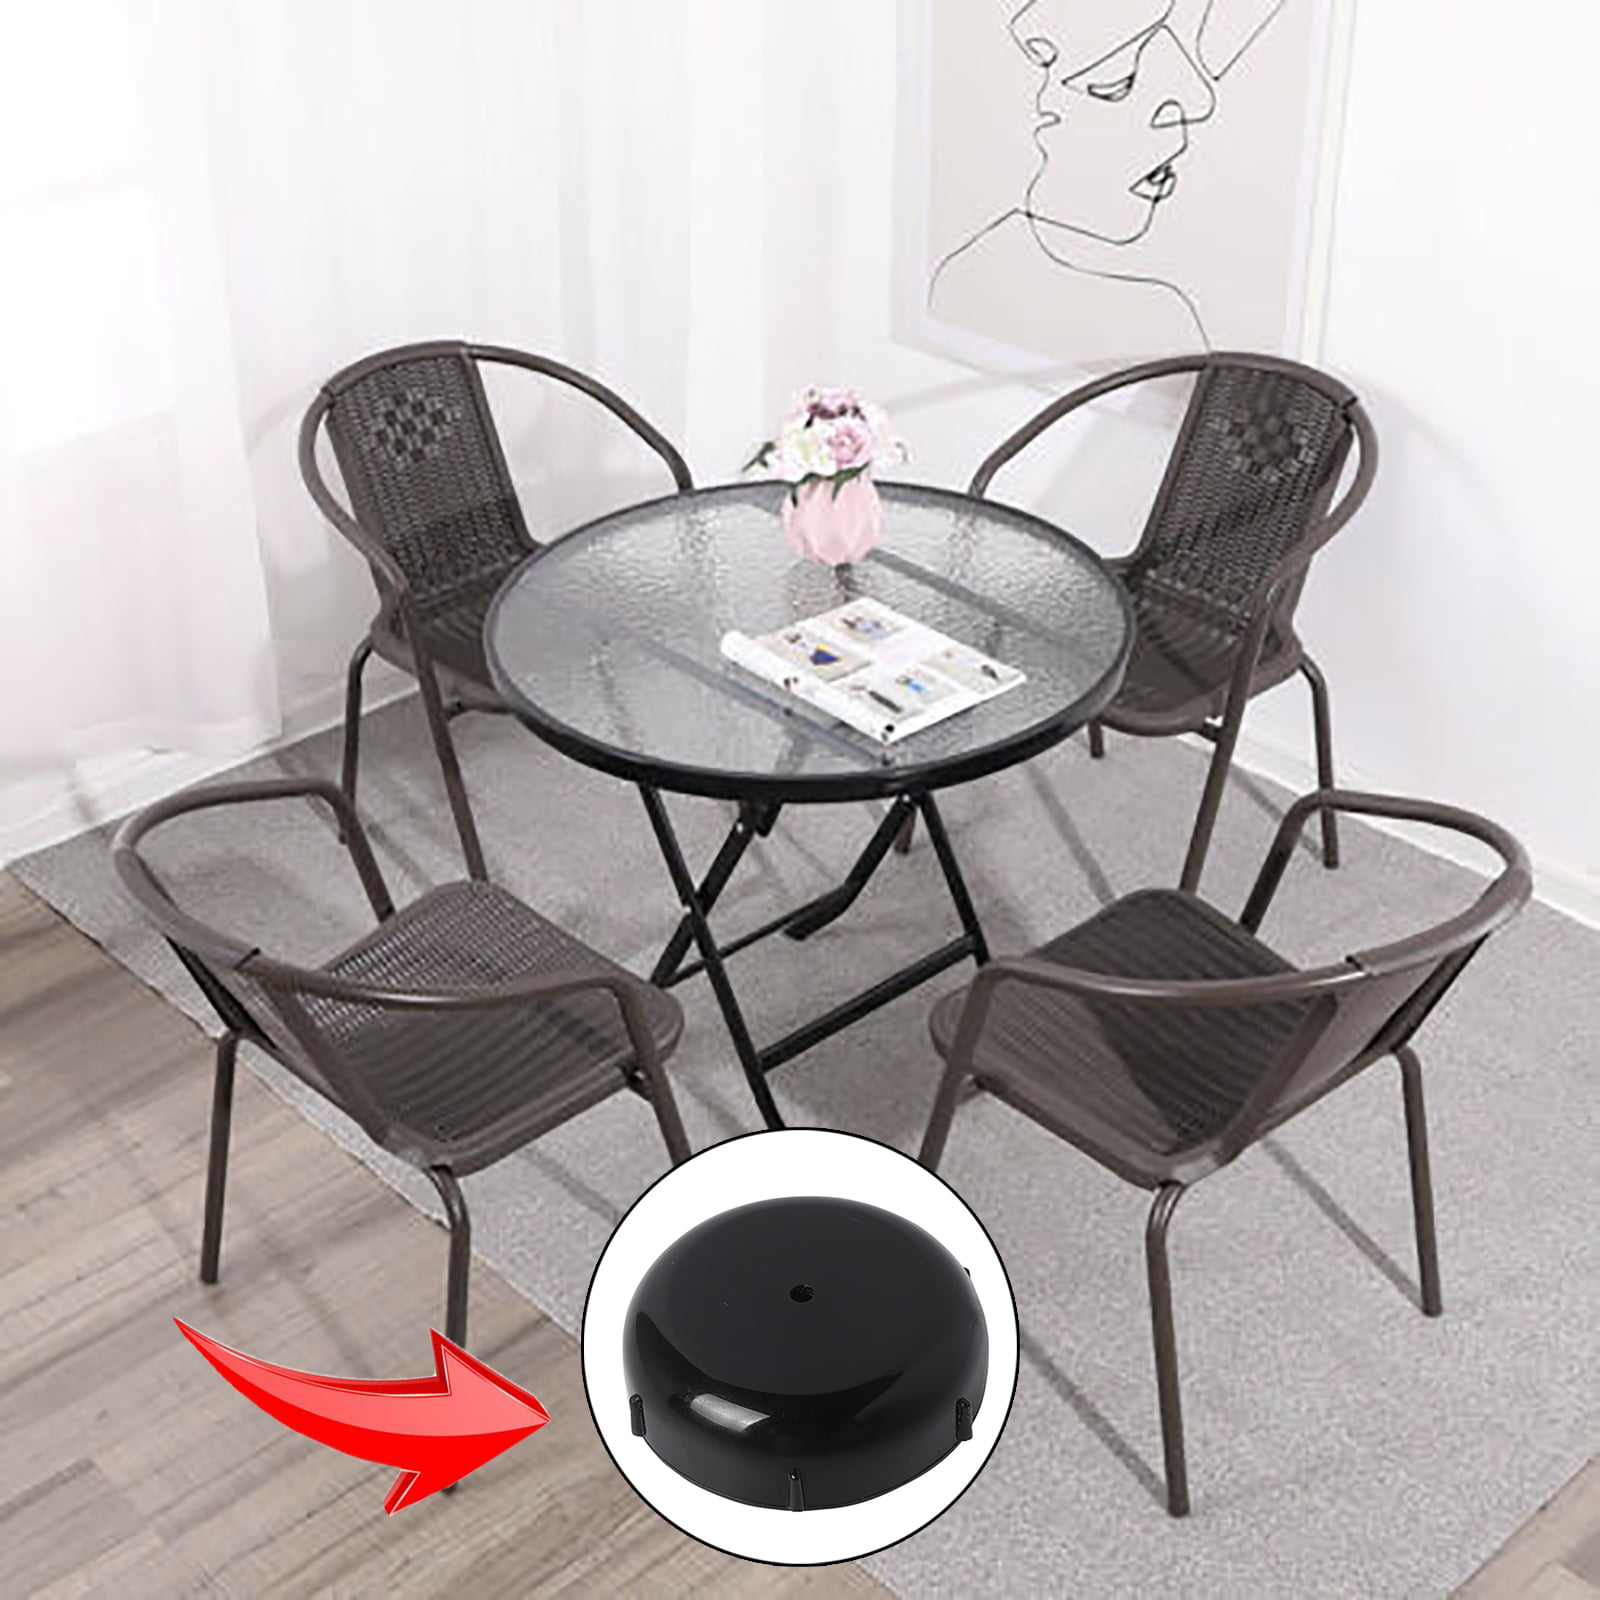 Details about   20 Plastic Glides Slide Protector for Wrought Iron Furniture Table Chair Legs 